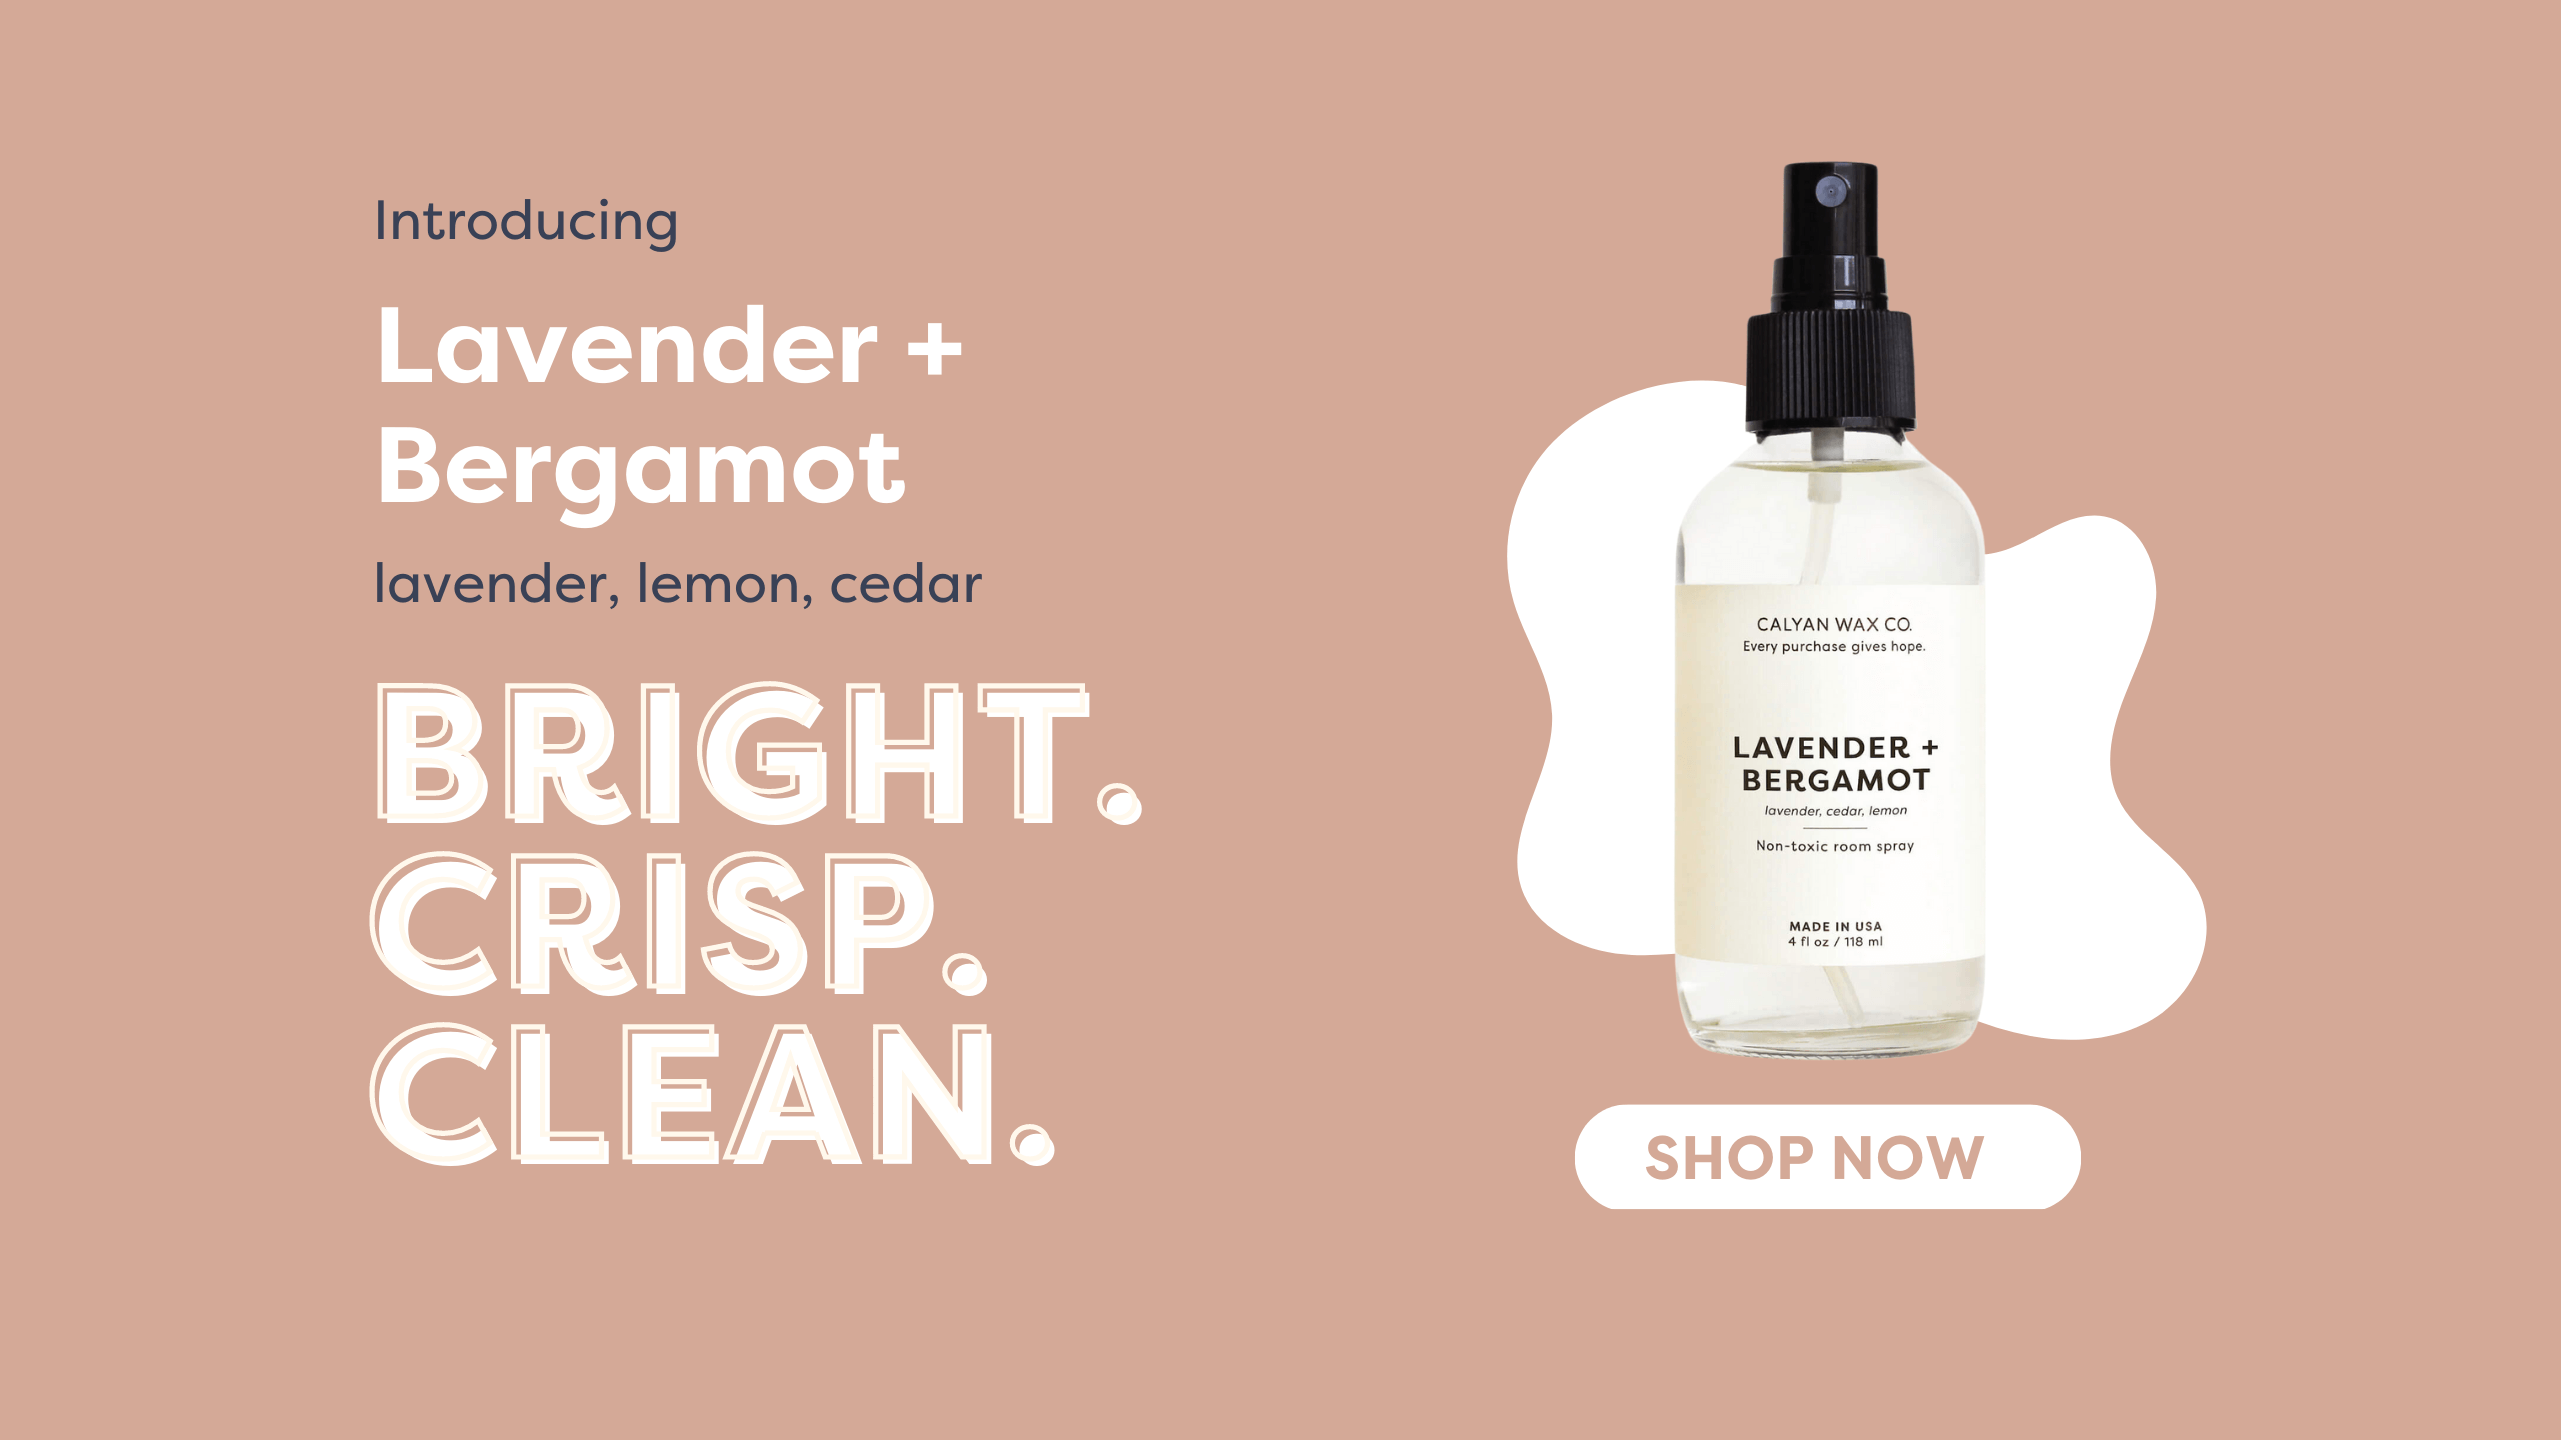 Lavender + Bergamot Room Spray with Buy Now Button - smells like lavender, cedar, and lemon - bright, crisp, and clean